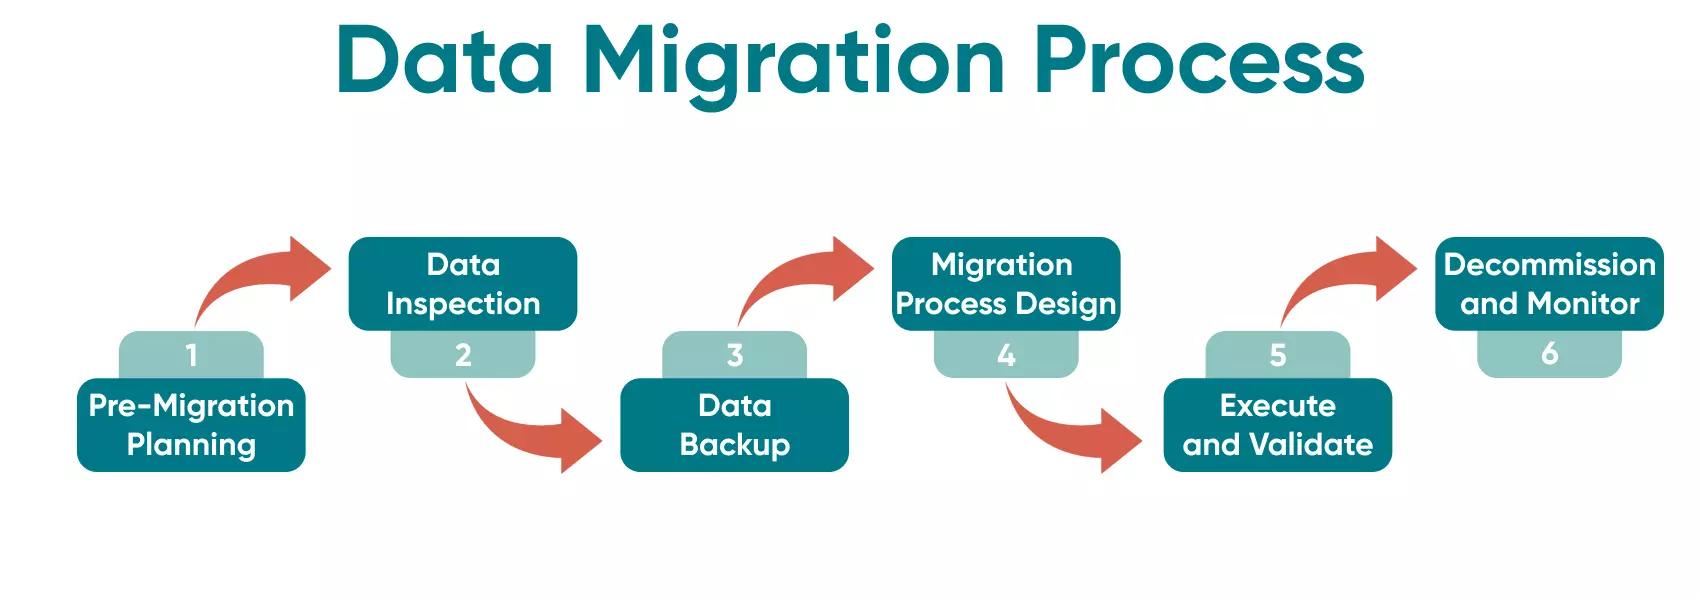 There are a number of variations to the data migration process, however, there are six main stages that need to be included for a professional migration process.